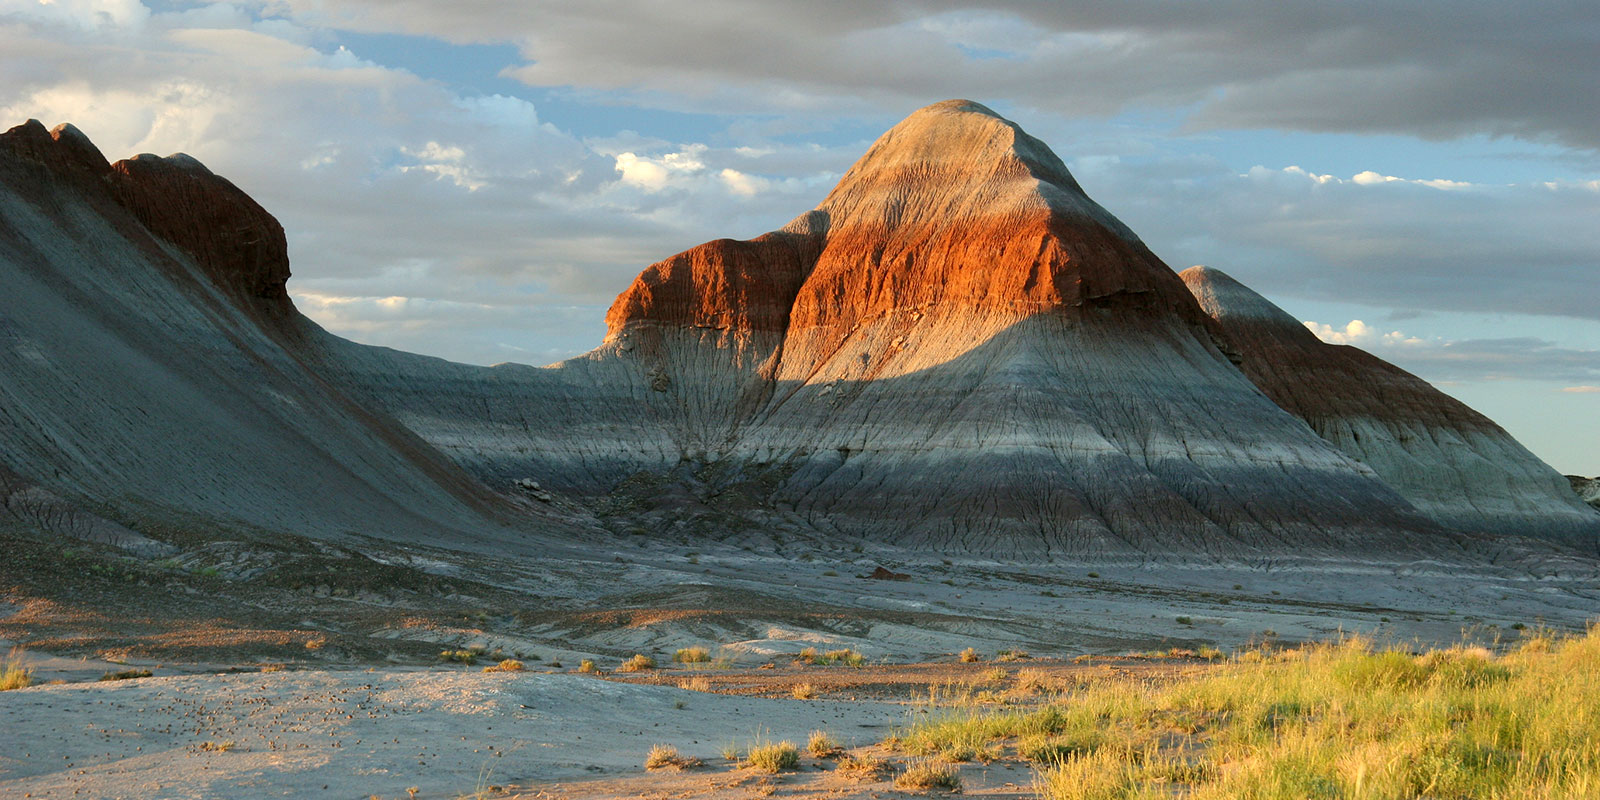 Pyramidal rock formations known as the Teepees in Arizona's Petrified Forest National Park